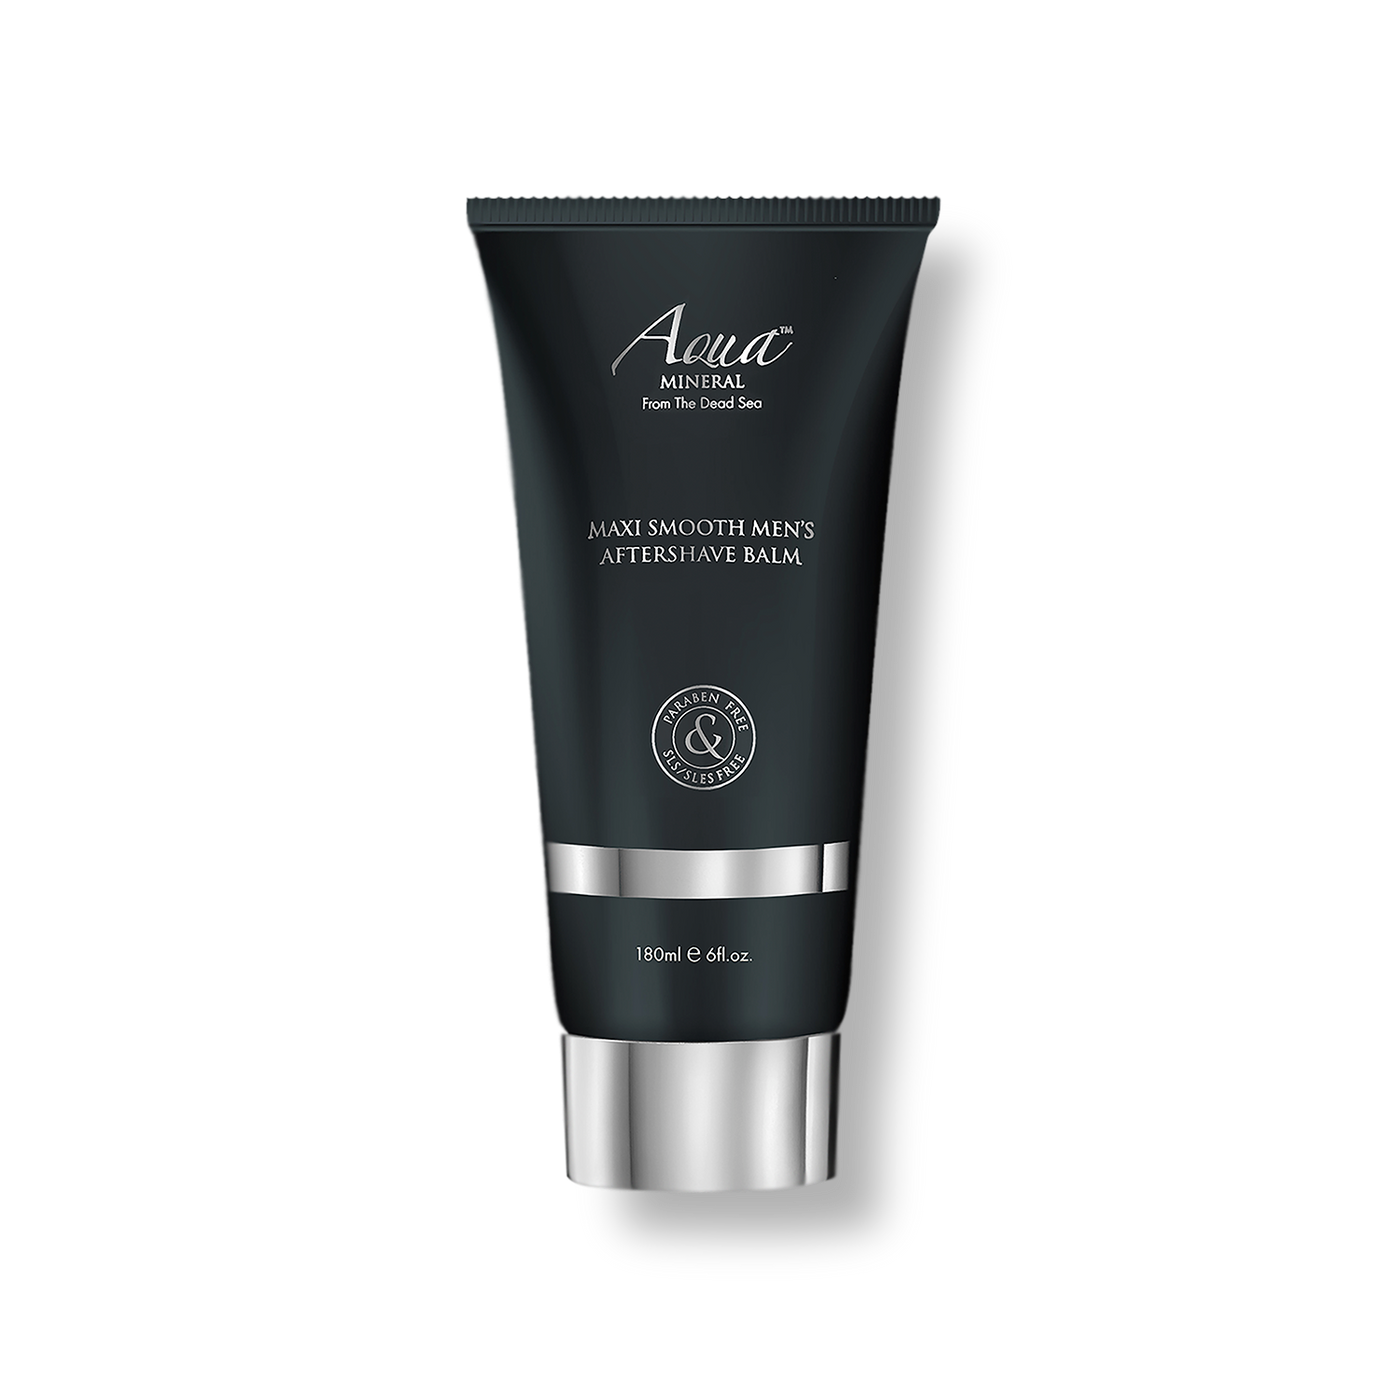 Maxi Smooth Men’s Aftershave Balm